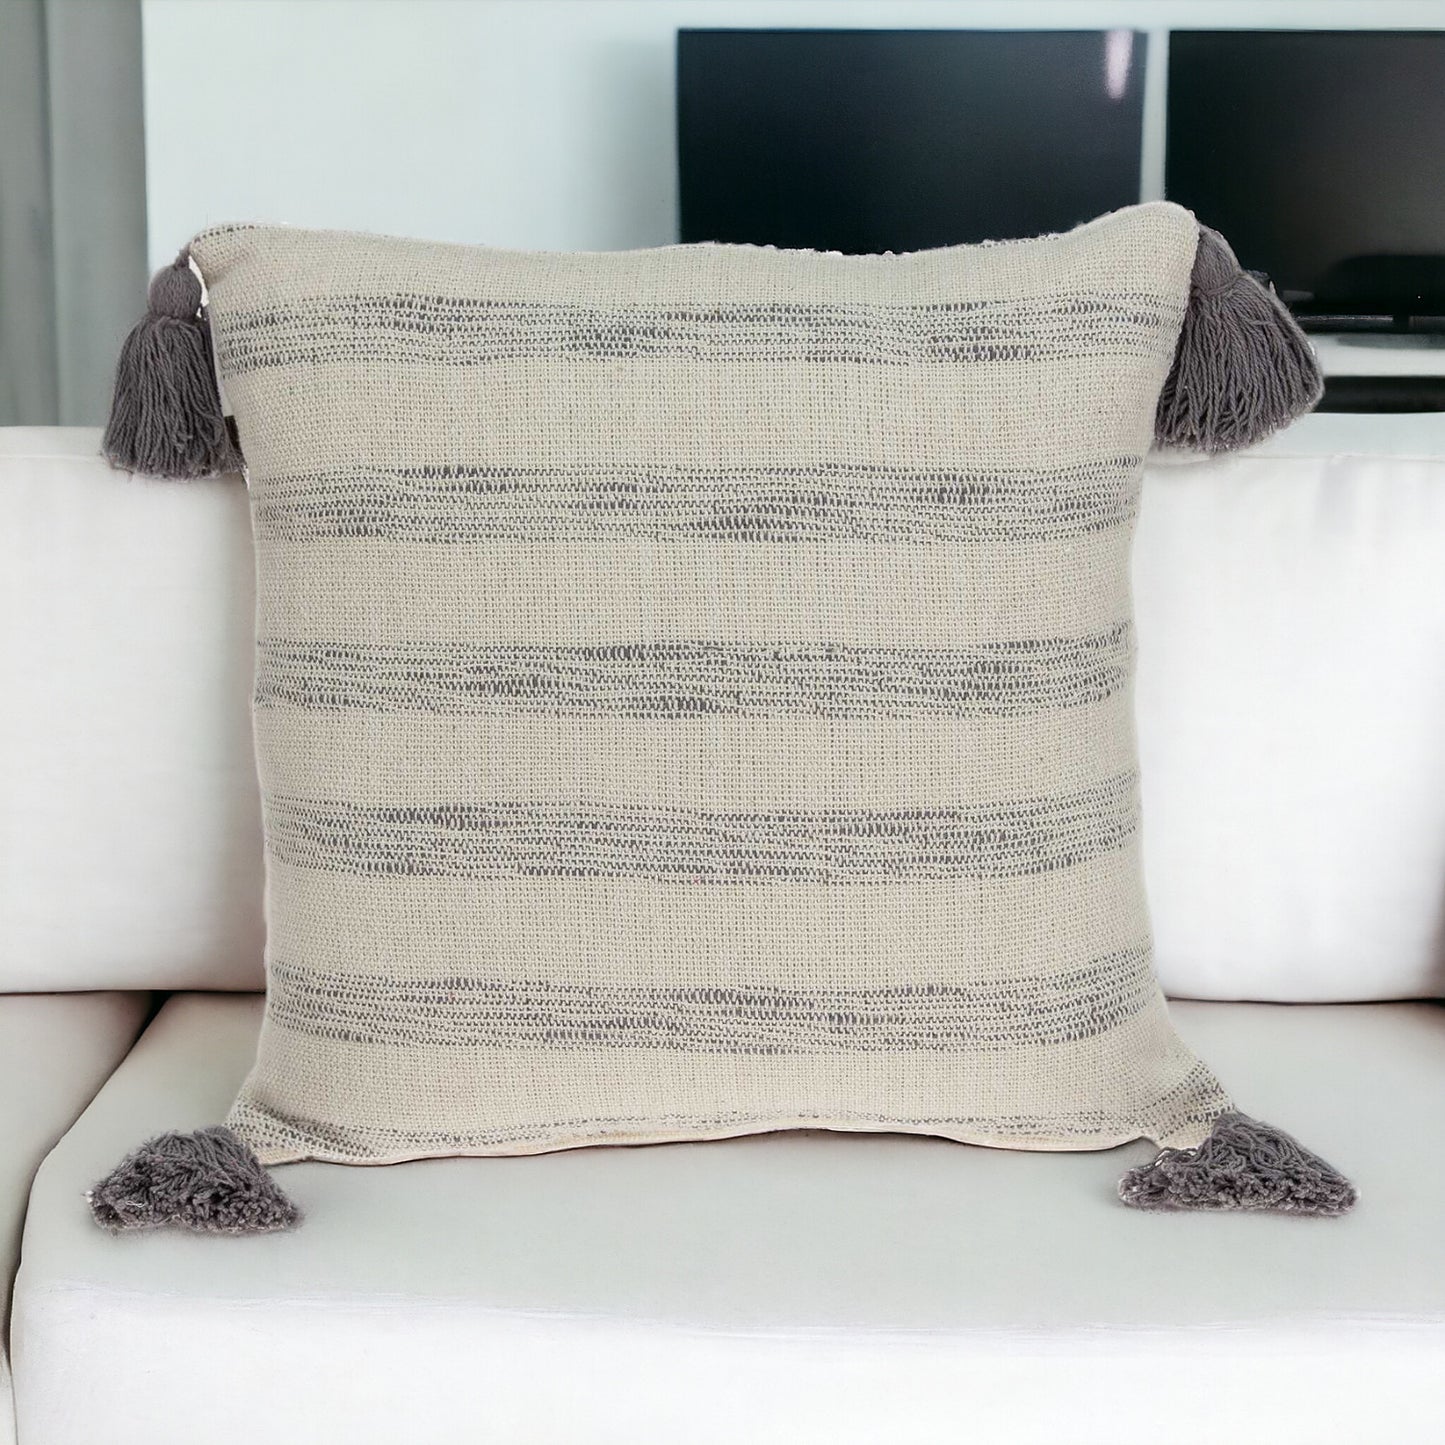 18" Beige and Gray Striped Cotton Throw Pillow With Tassels